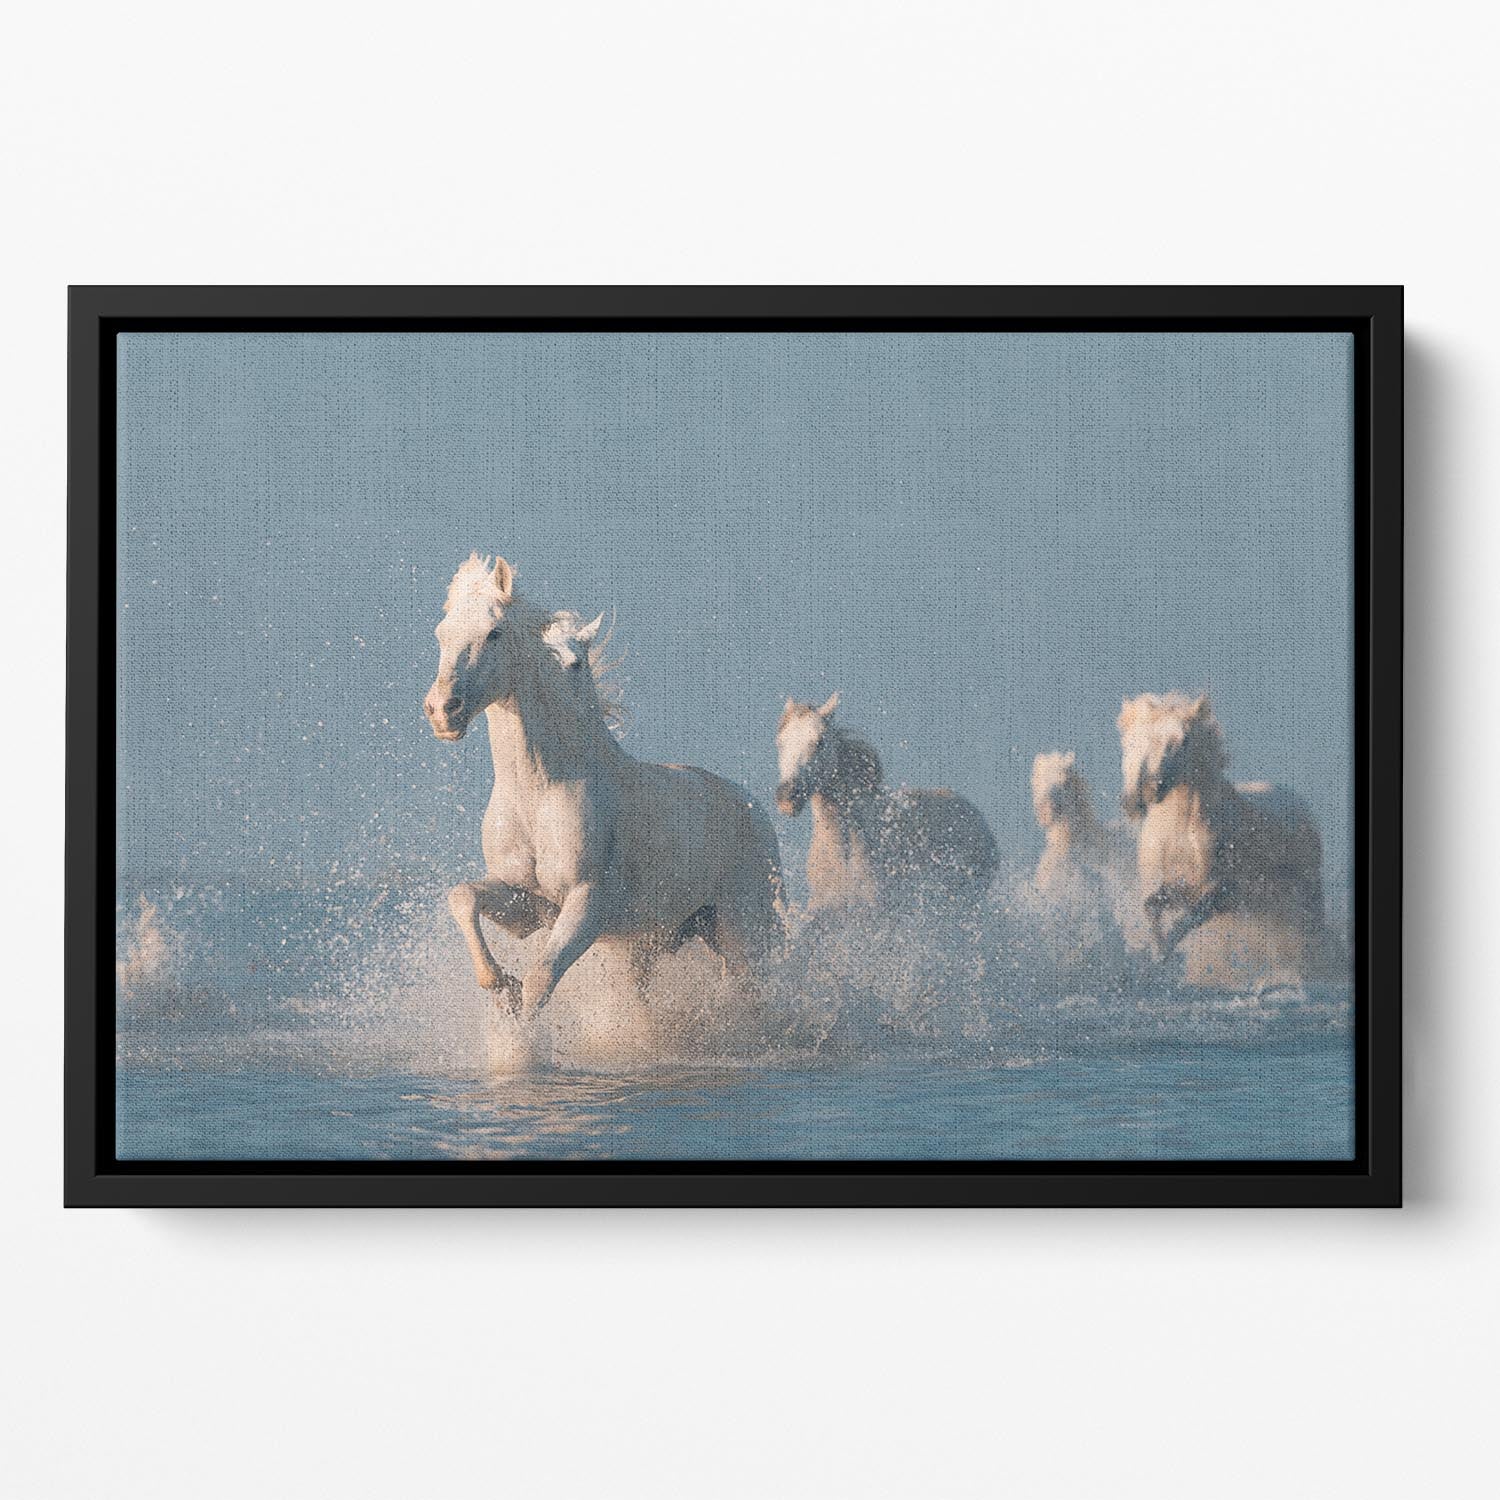 Wite Horses Running In Water Floating Framed Canvas - Canvas Art Rocks - 2